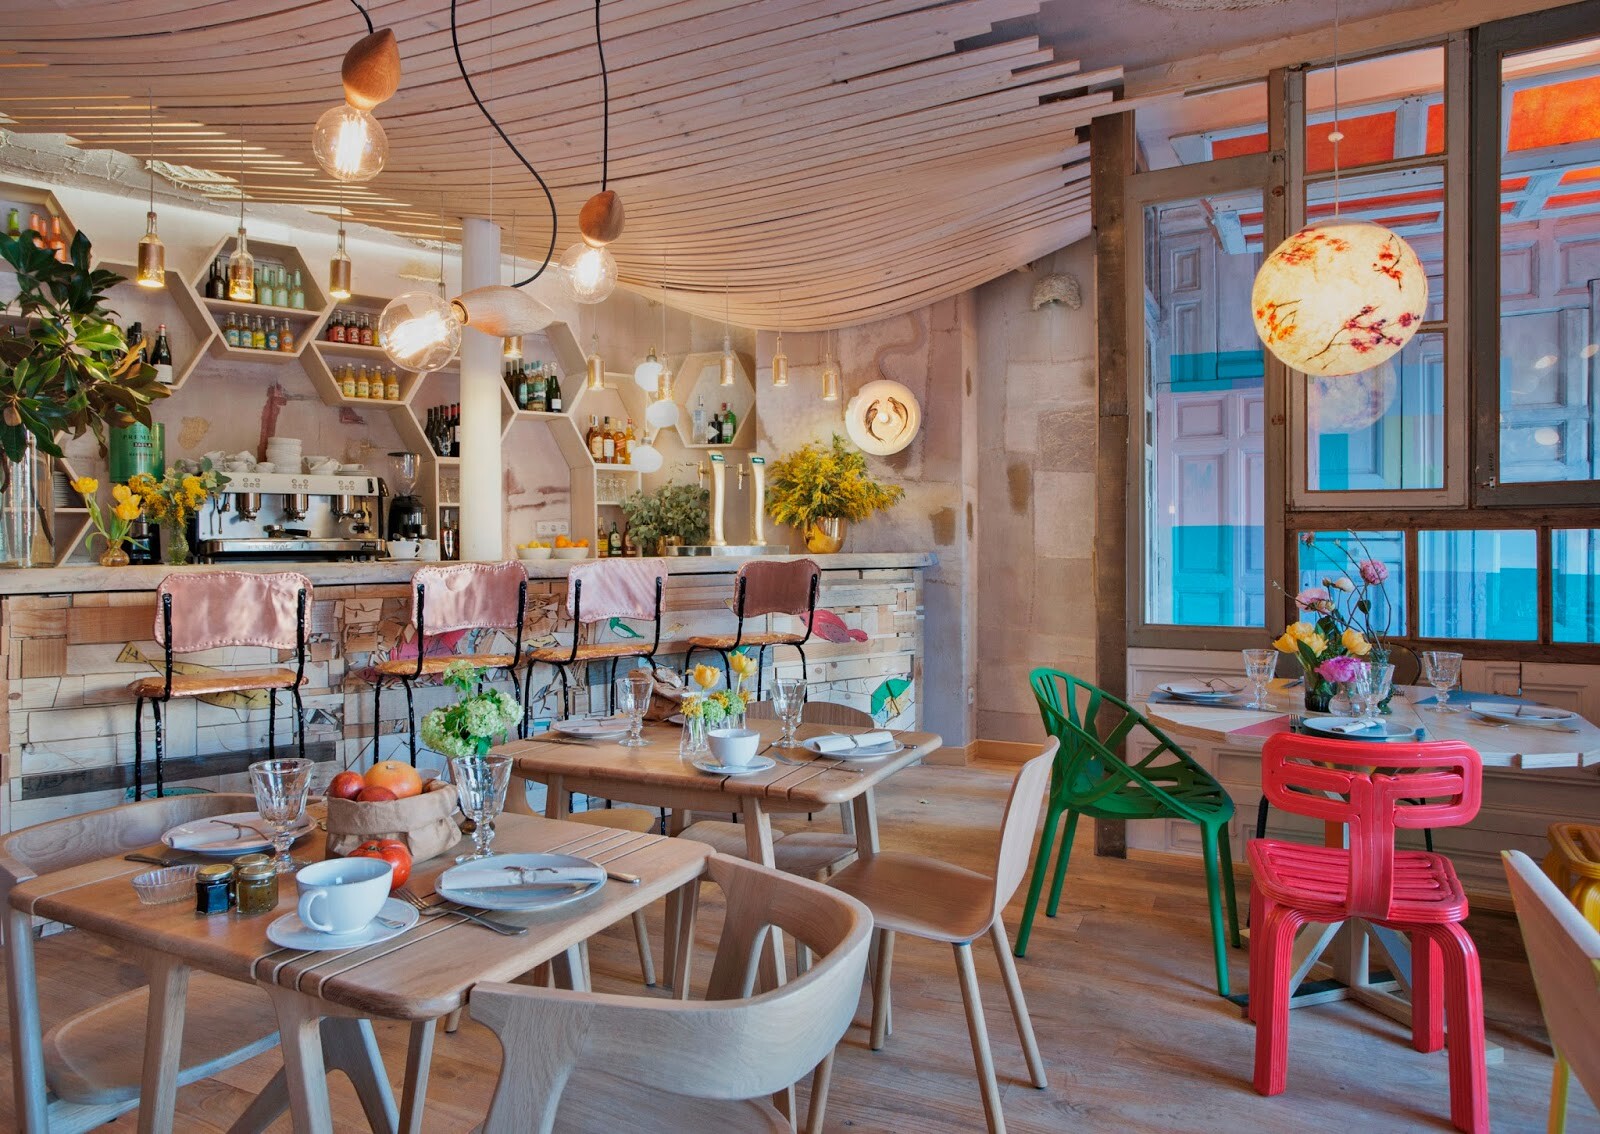 Mama Campo restaurant eclectic design with decors and pastel shades - www.homeworlddesign. com (1)